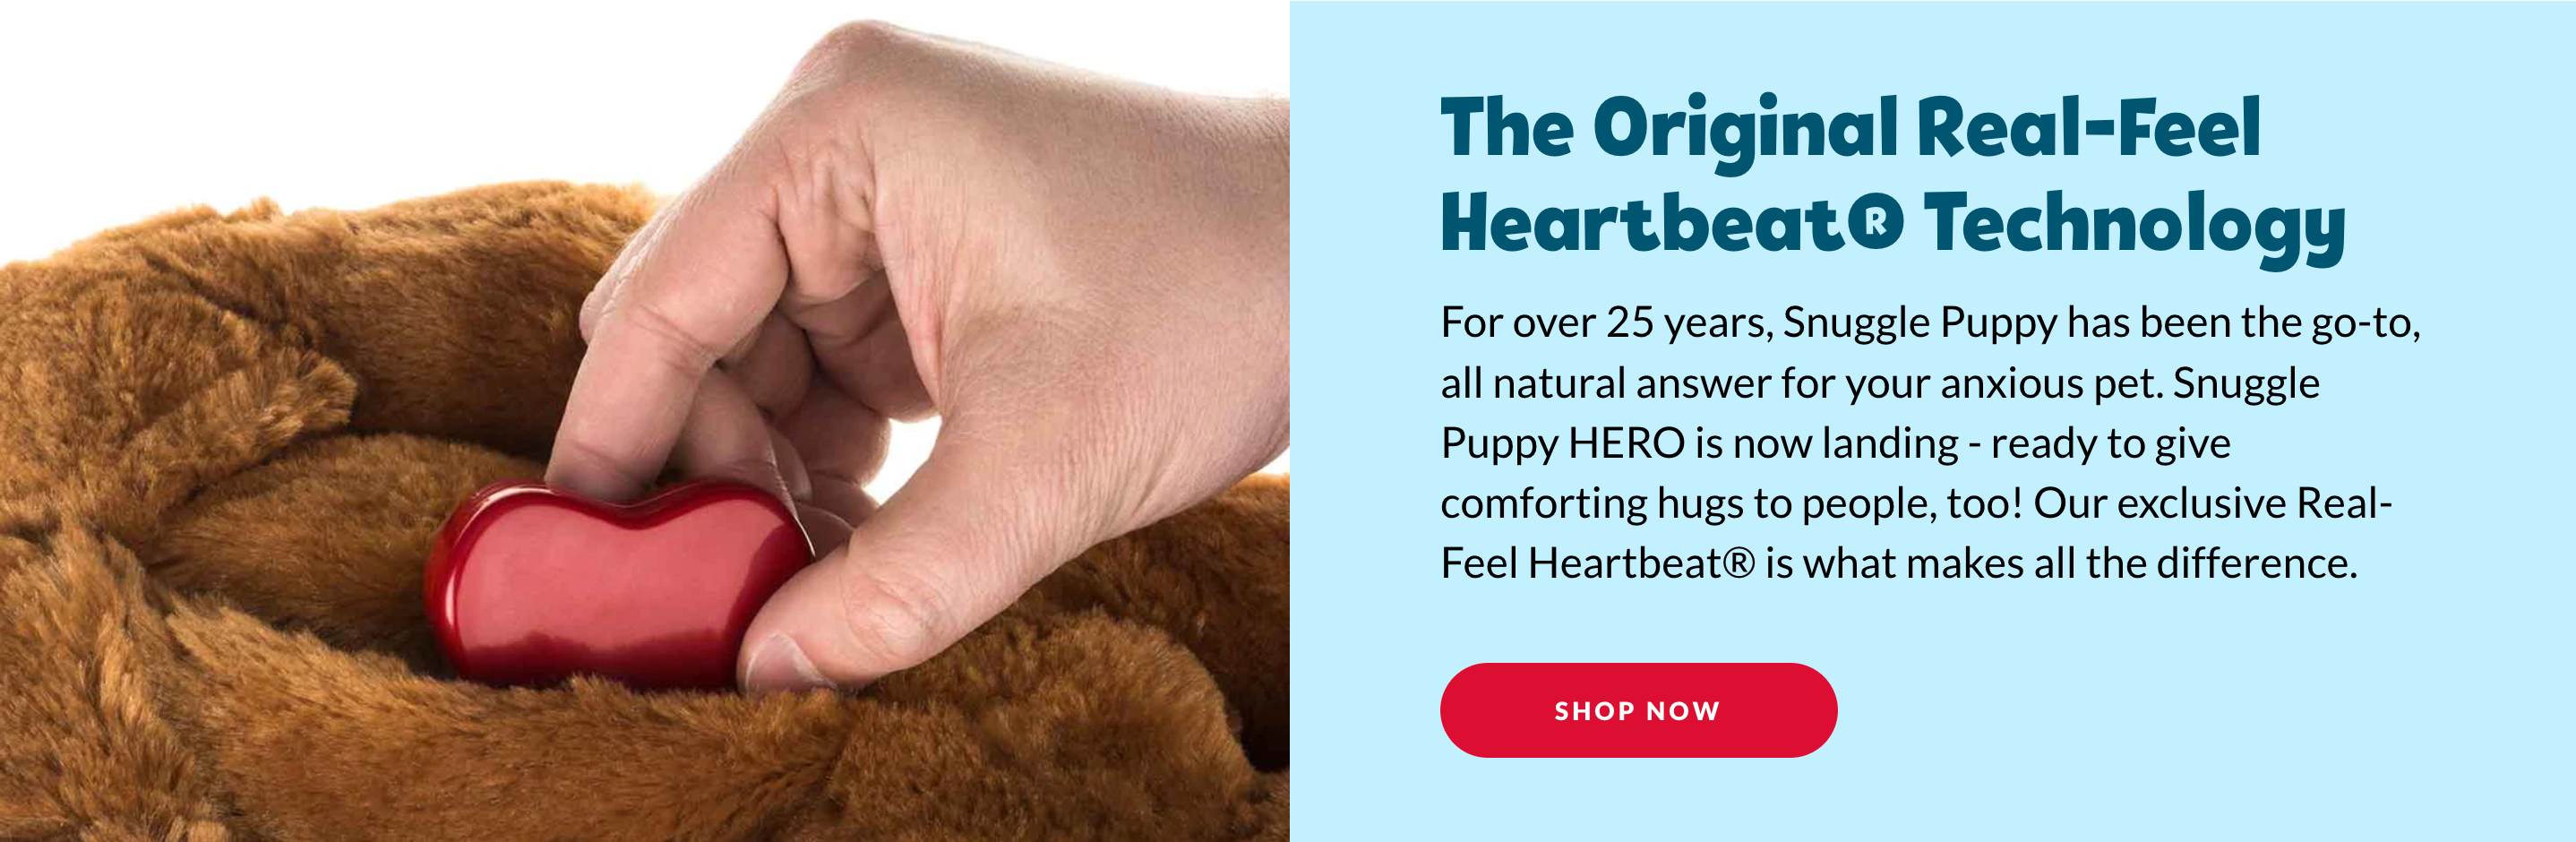 Screenshot of a block on Snuggle Puppy's website that talks about their heartbeat technology